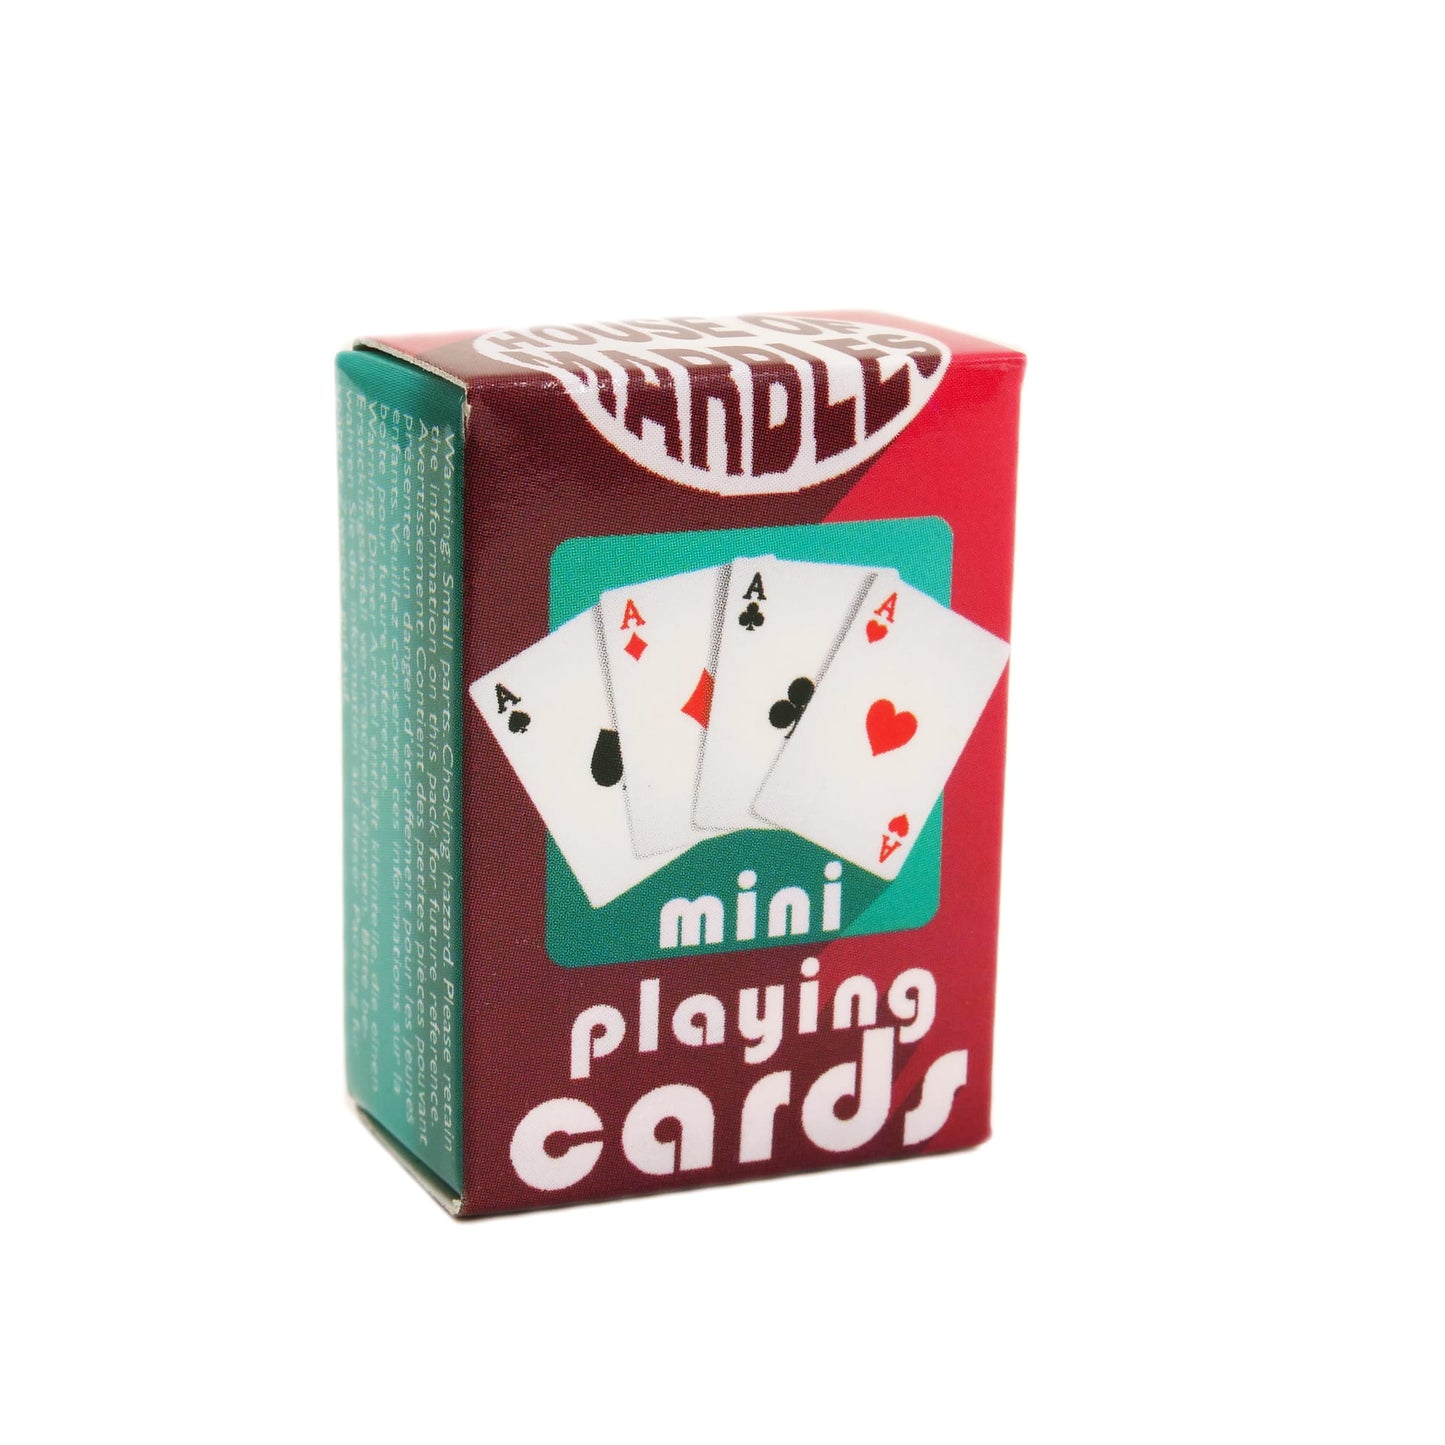 Mini Playing Cards